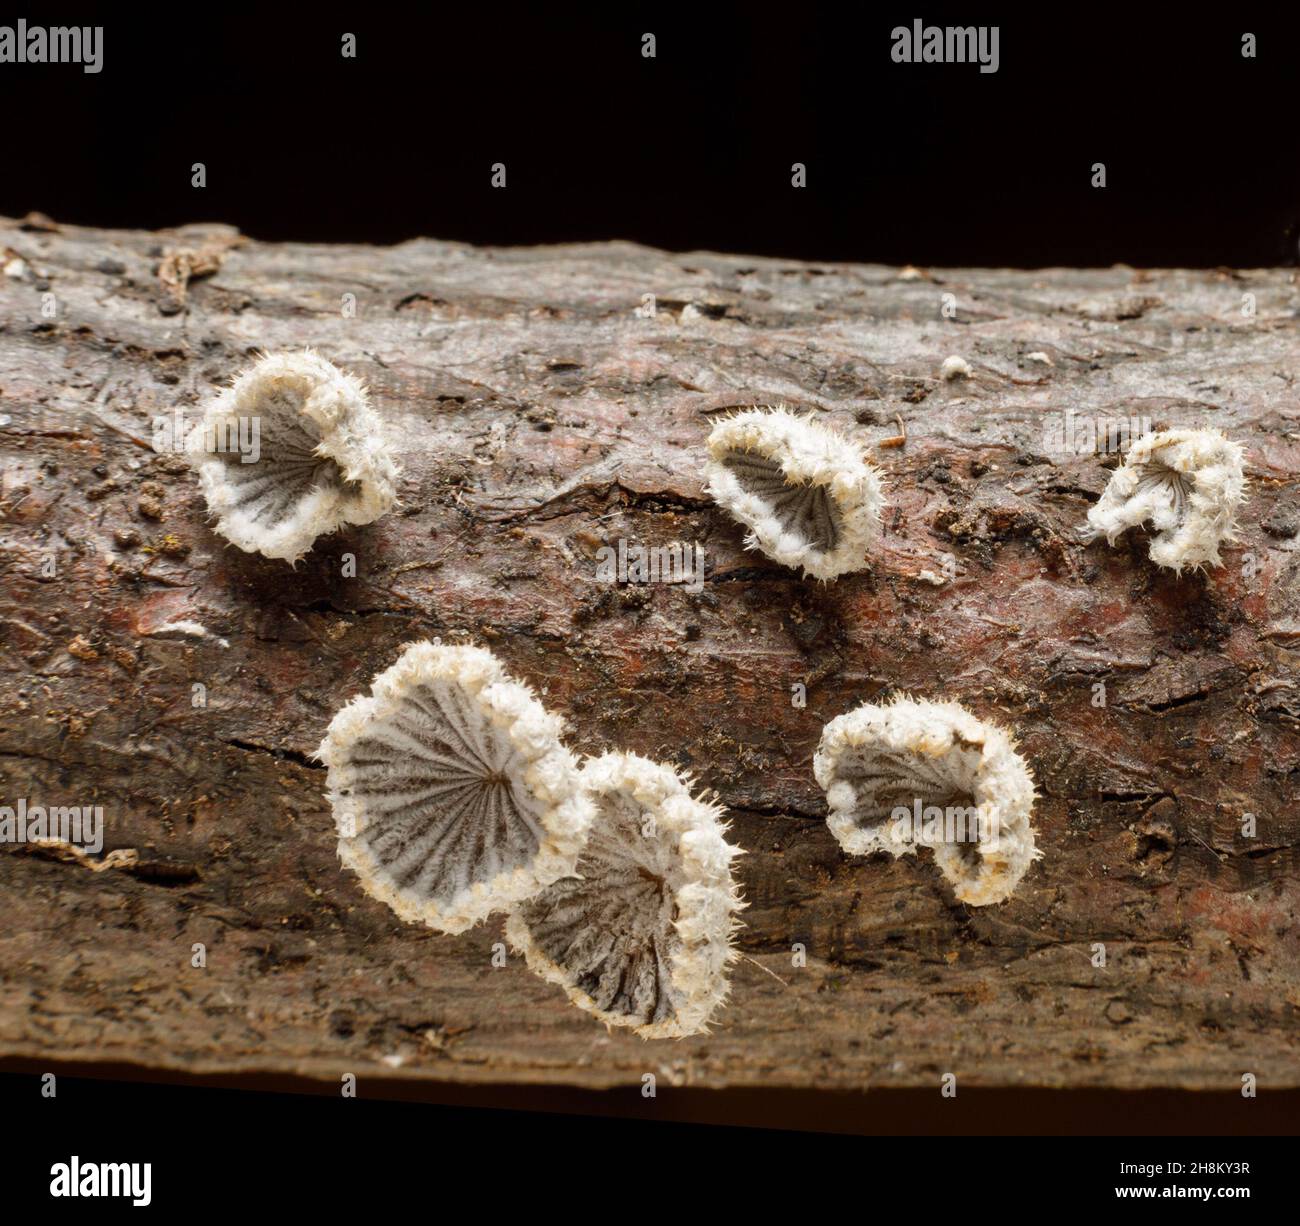 Schizophyllum Commune Is a split-gill fungi that grows on dead logs. No culinary interest. New York State, USA. Stock Photo